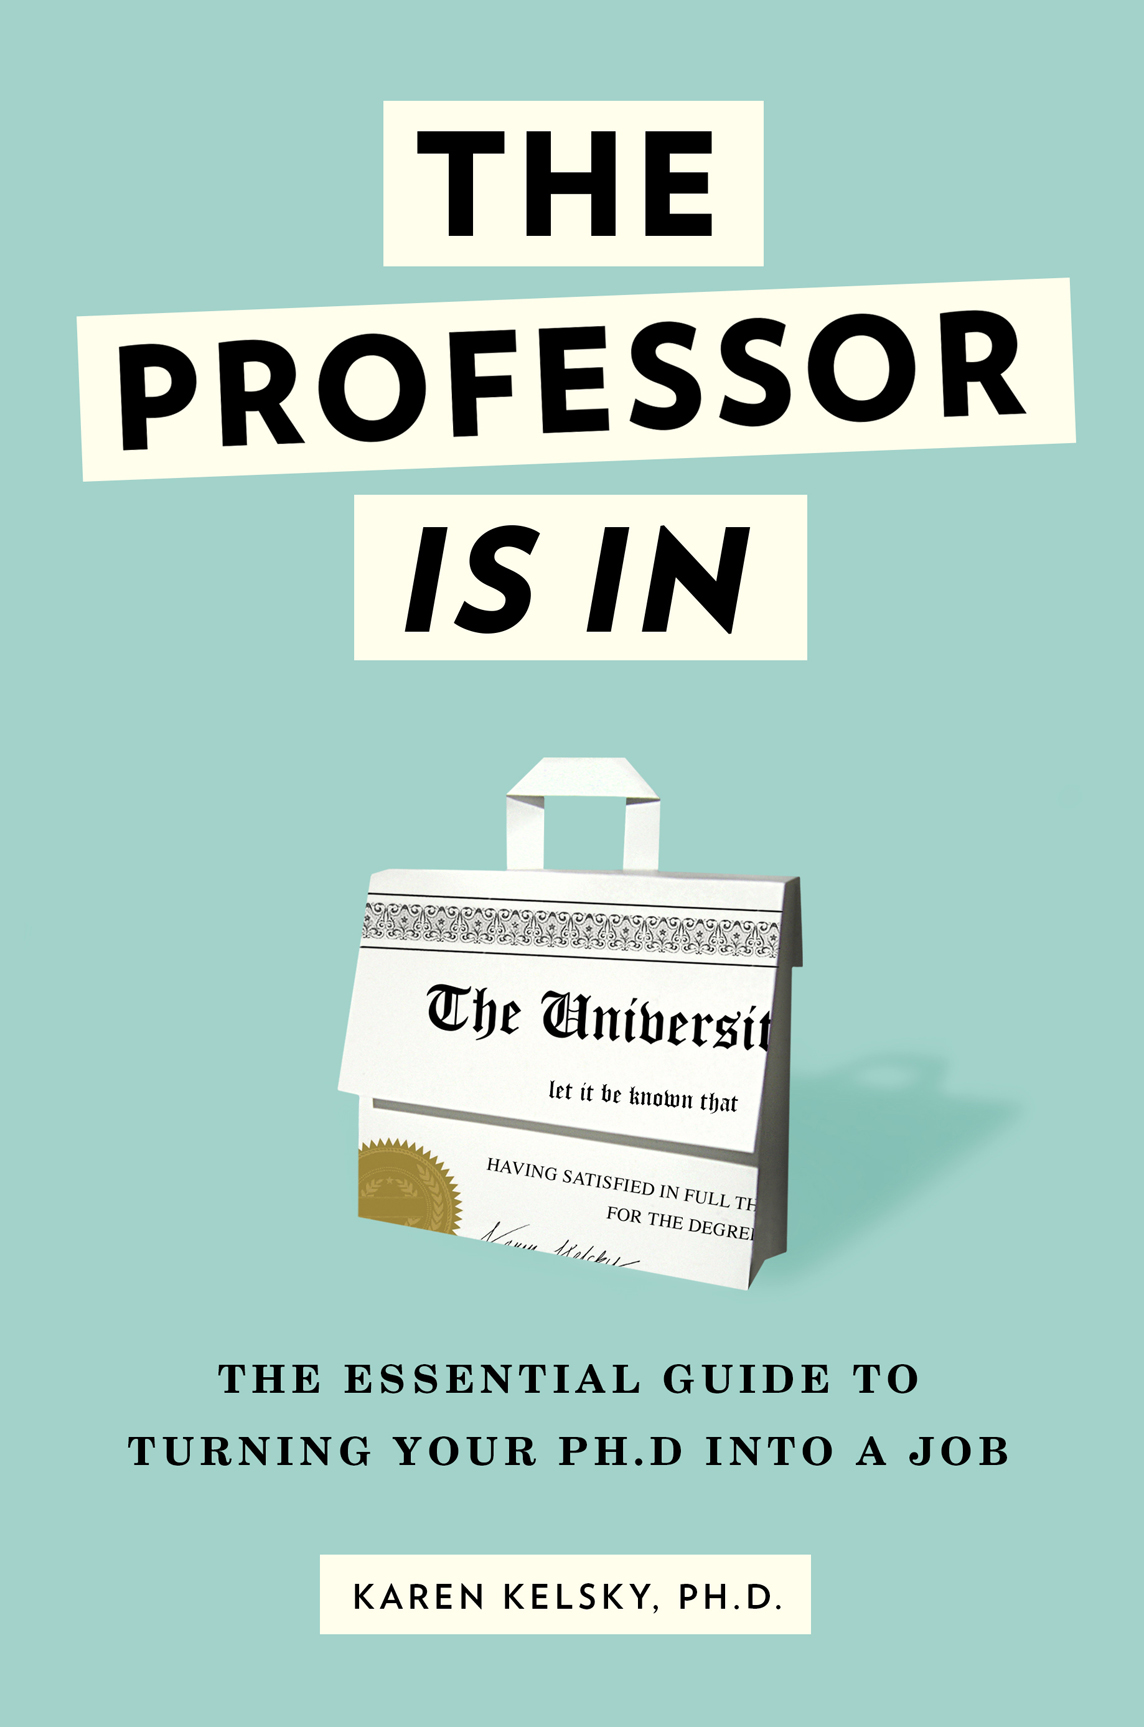 The Professor Is In: The Essential Guide to Turning Your Ph.D. Into a Job